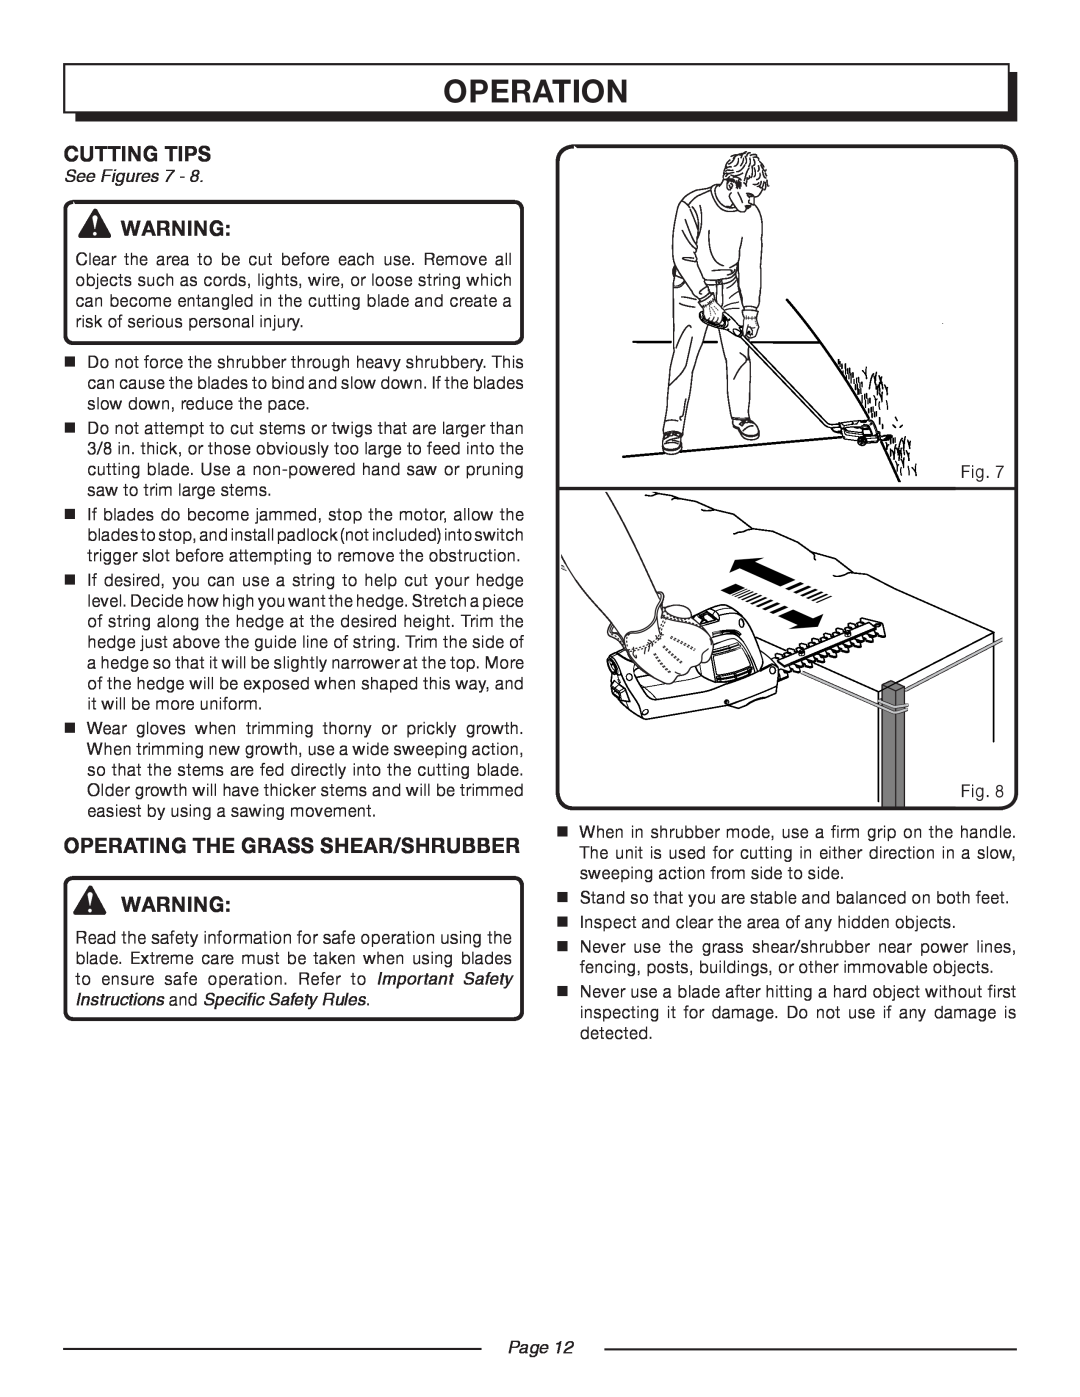 Homelite UT44170 manual Cutting Tips, OPERATING THE Grass shear/shrubber, See Figures 7, Operation, Page 